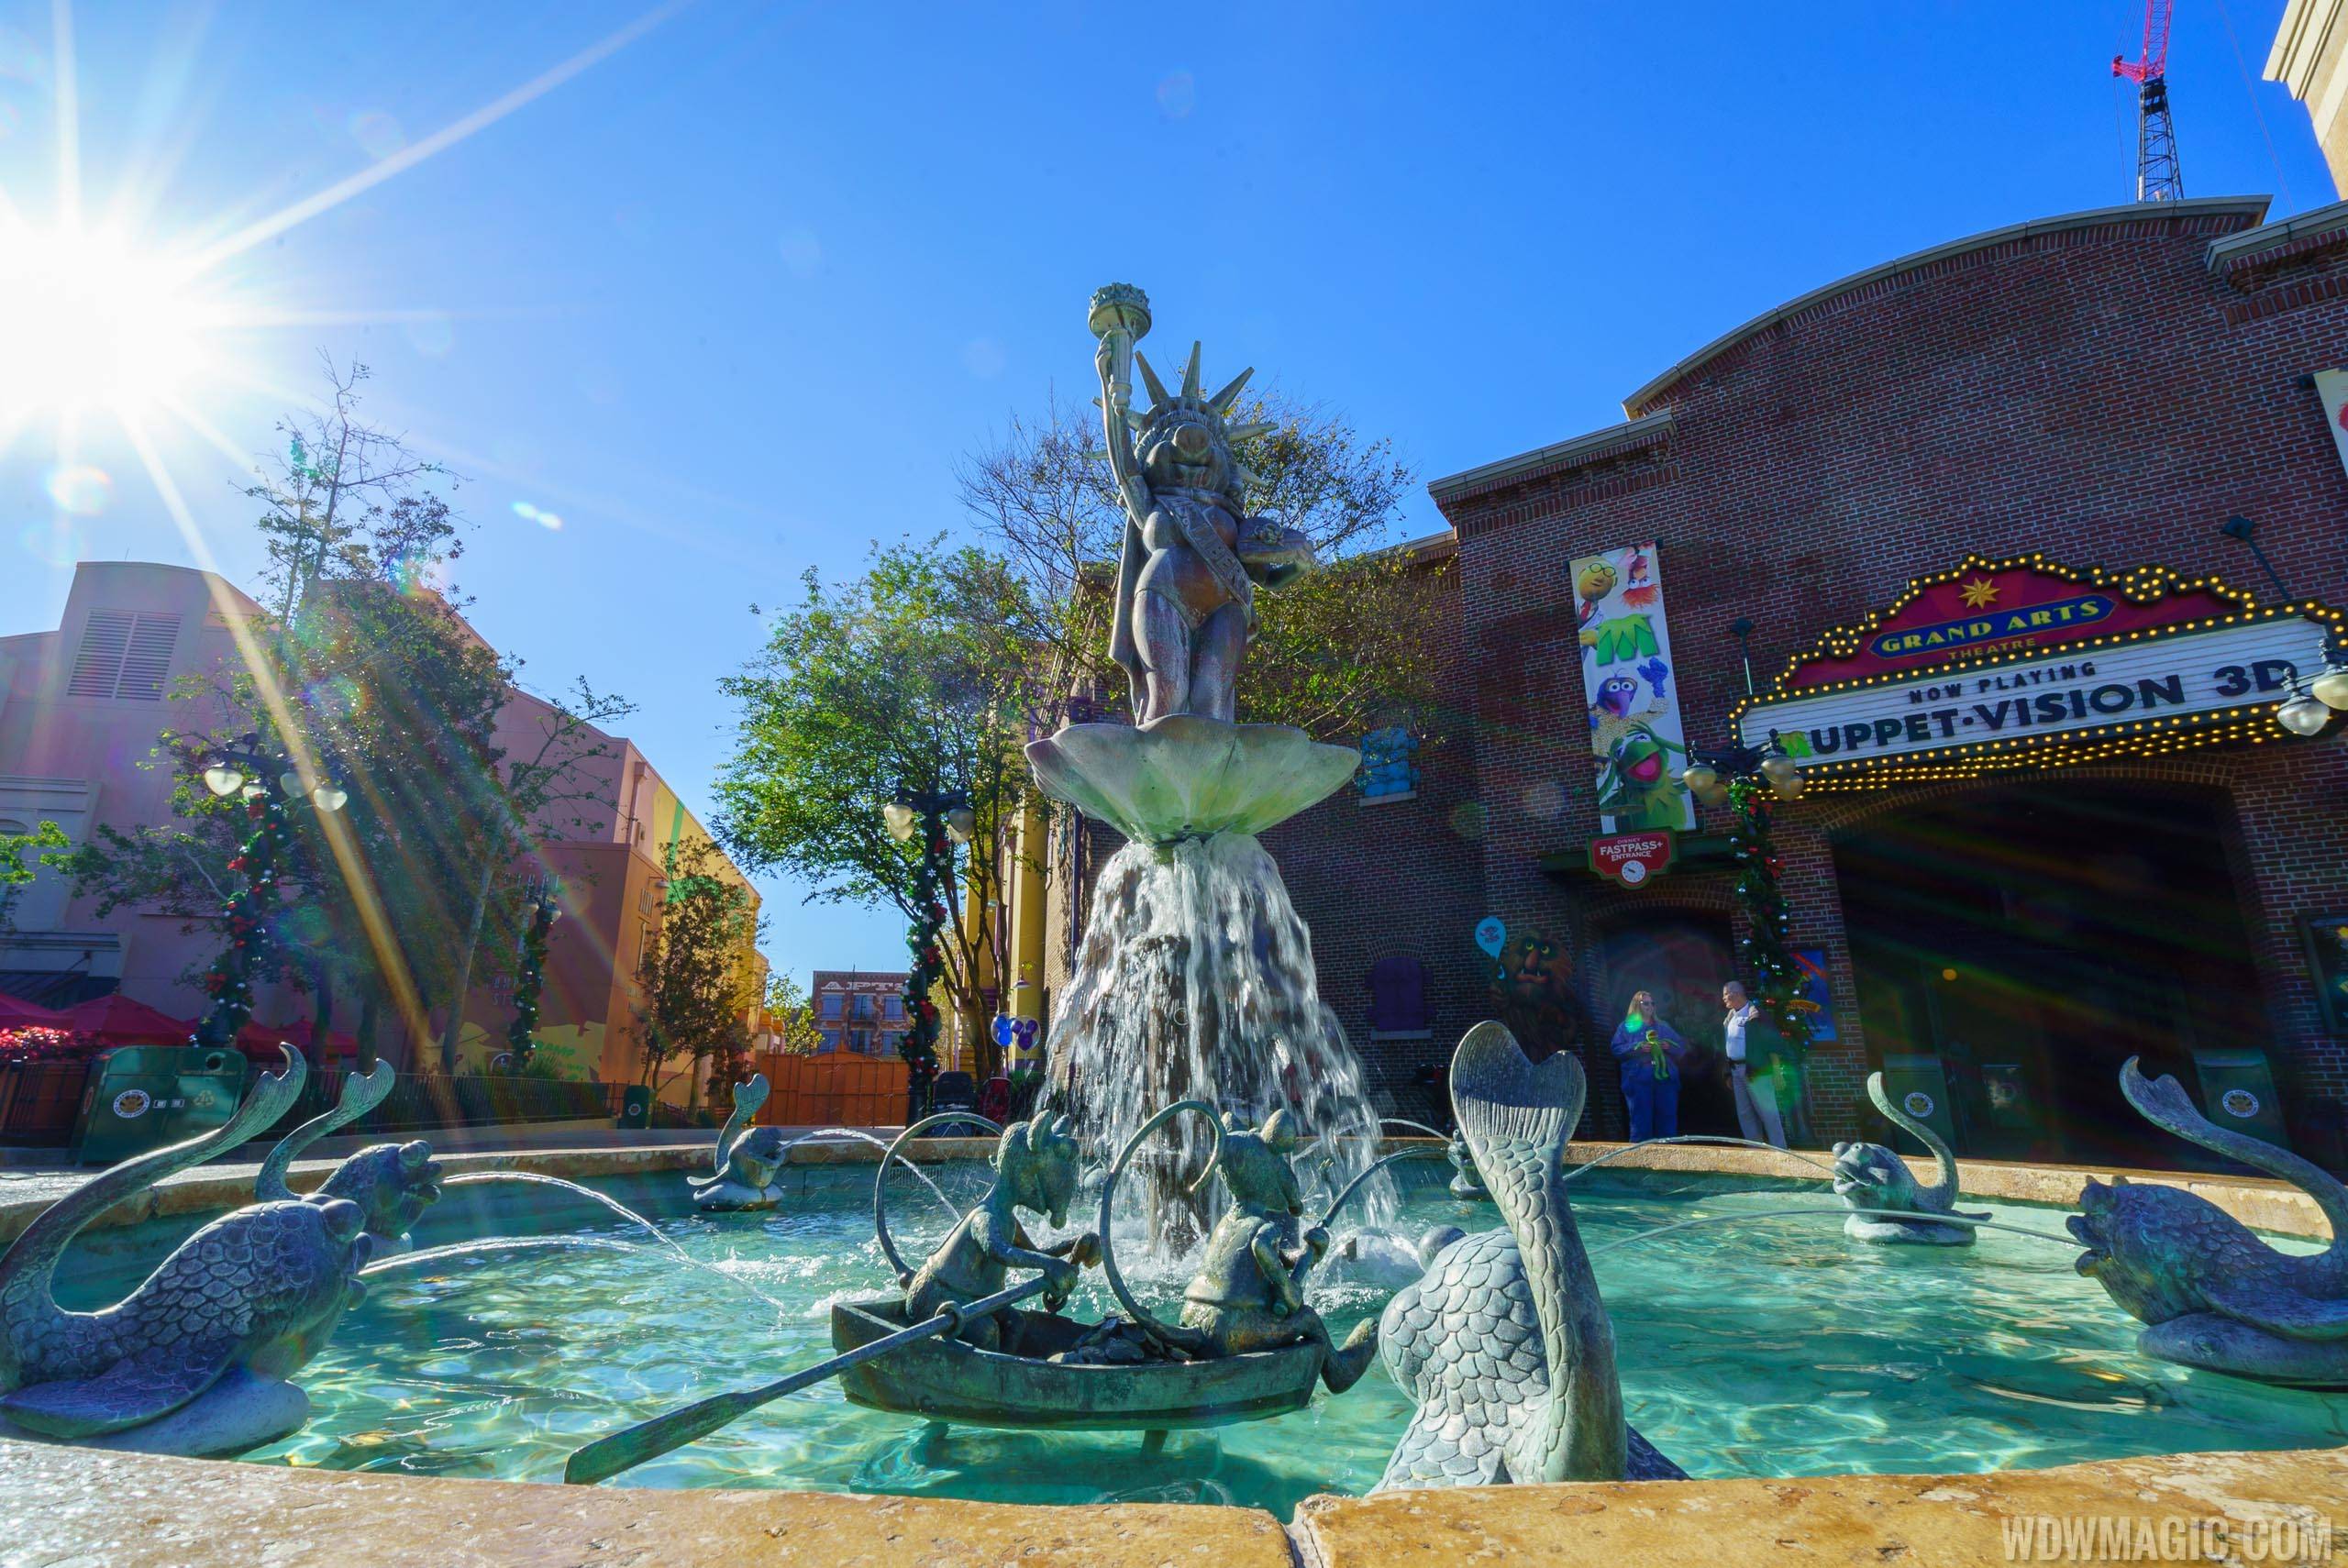 PHOTOS - Muppets Fountain returns to Grand Avenue at Disney's Hollywood Studios